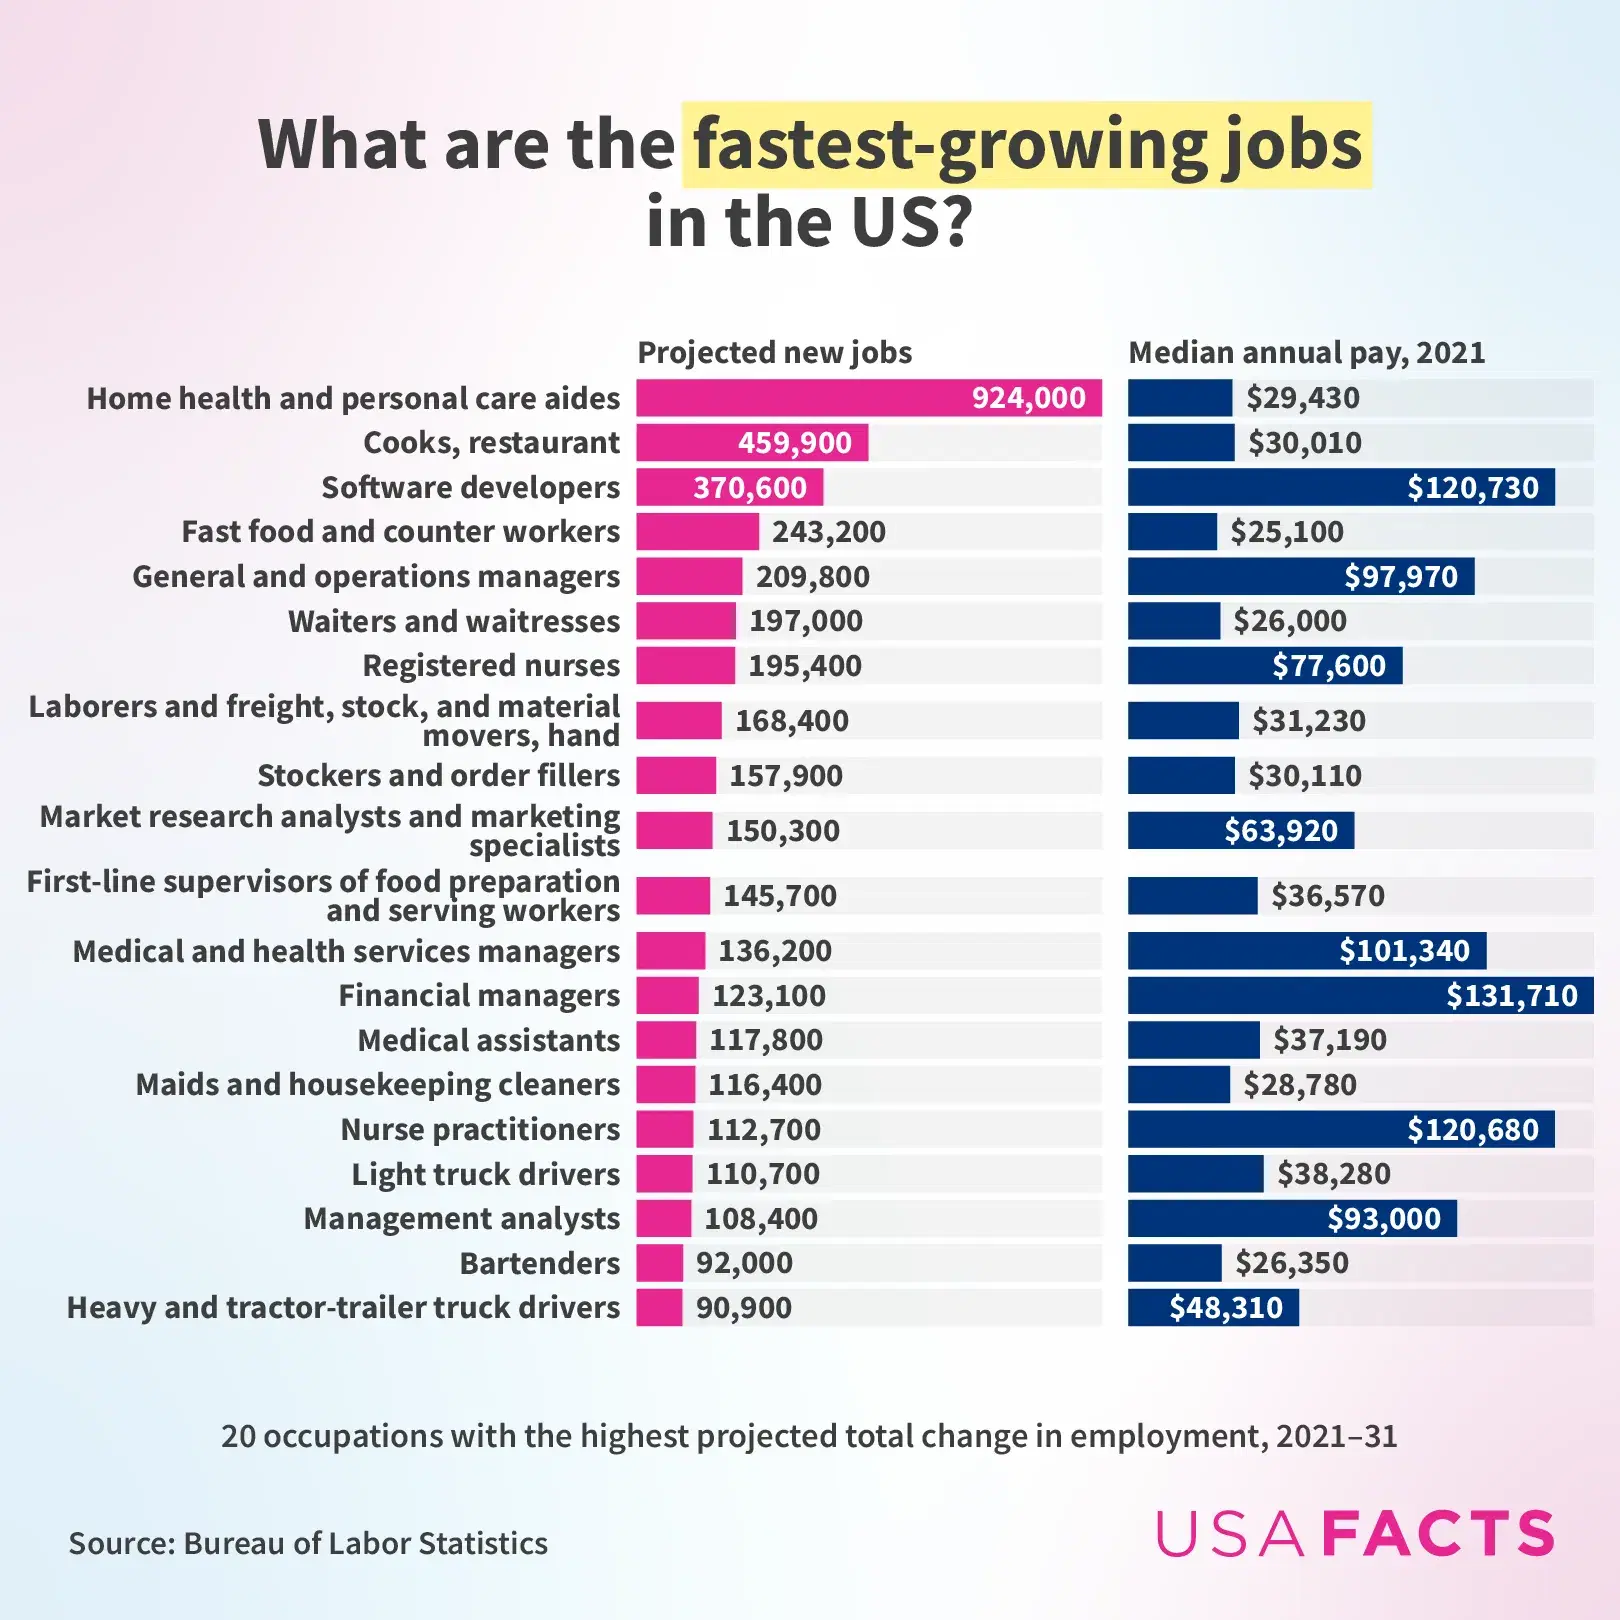 Jobs with the Most Projected Growth in the U.S.